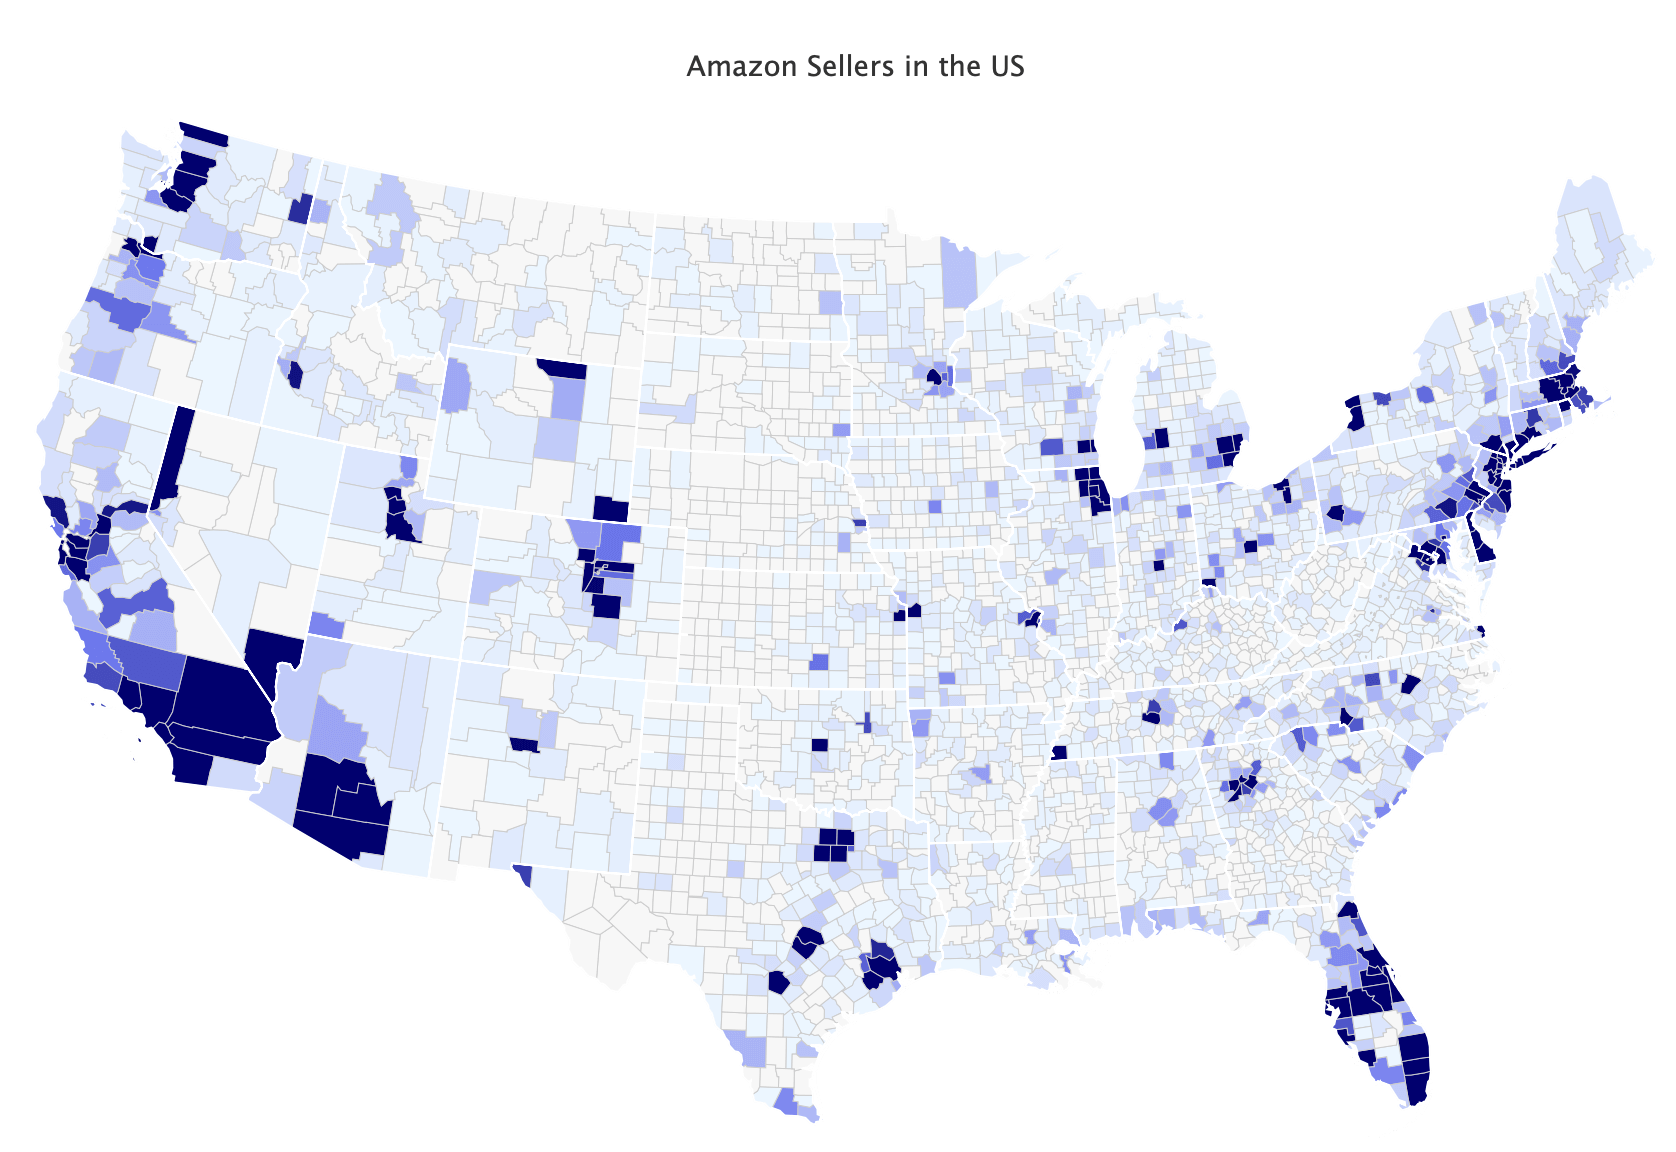 Amazon sellers map in the US